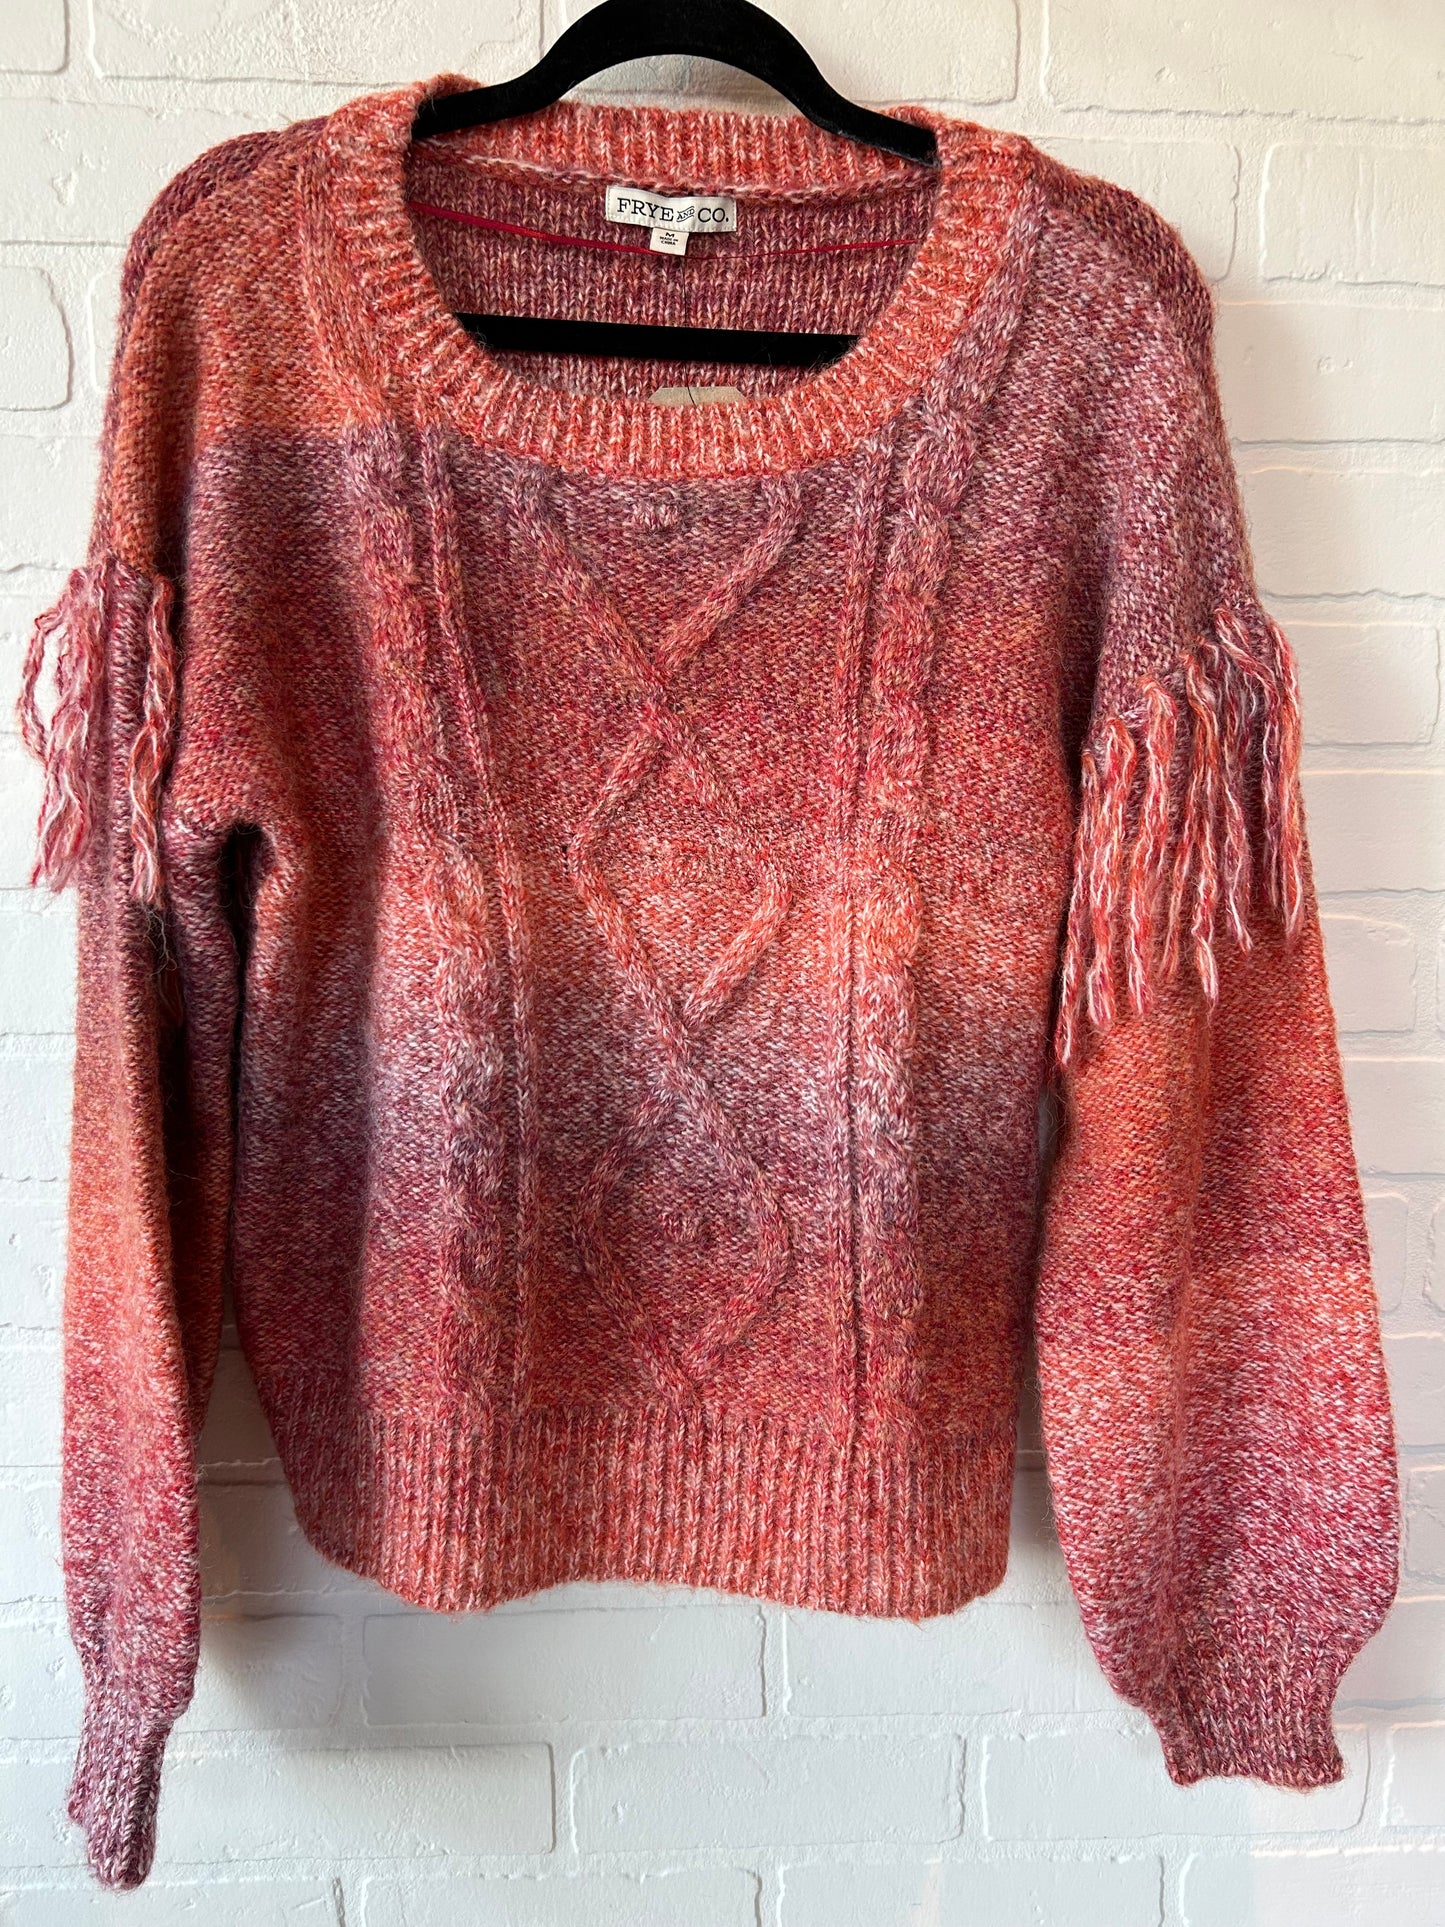 Orange & Red Sweater Frye And Co, Size M